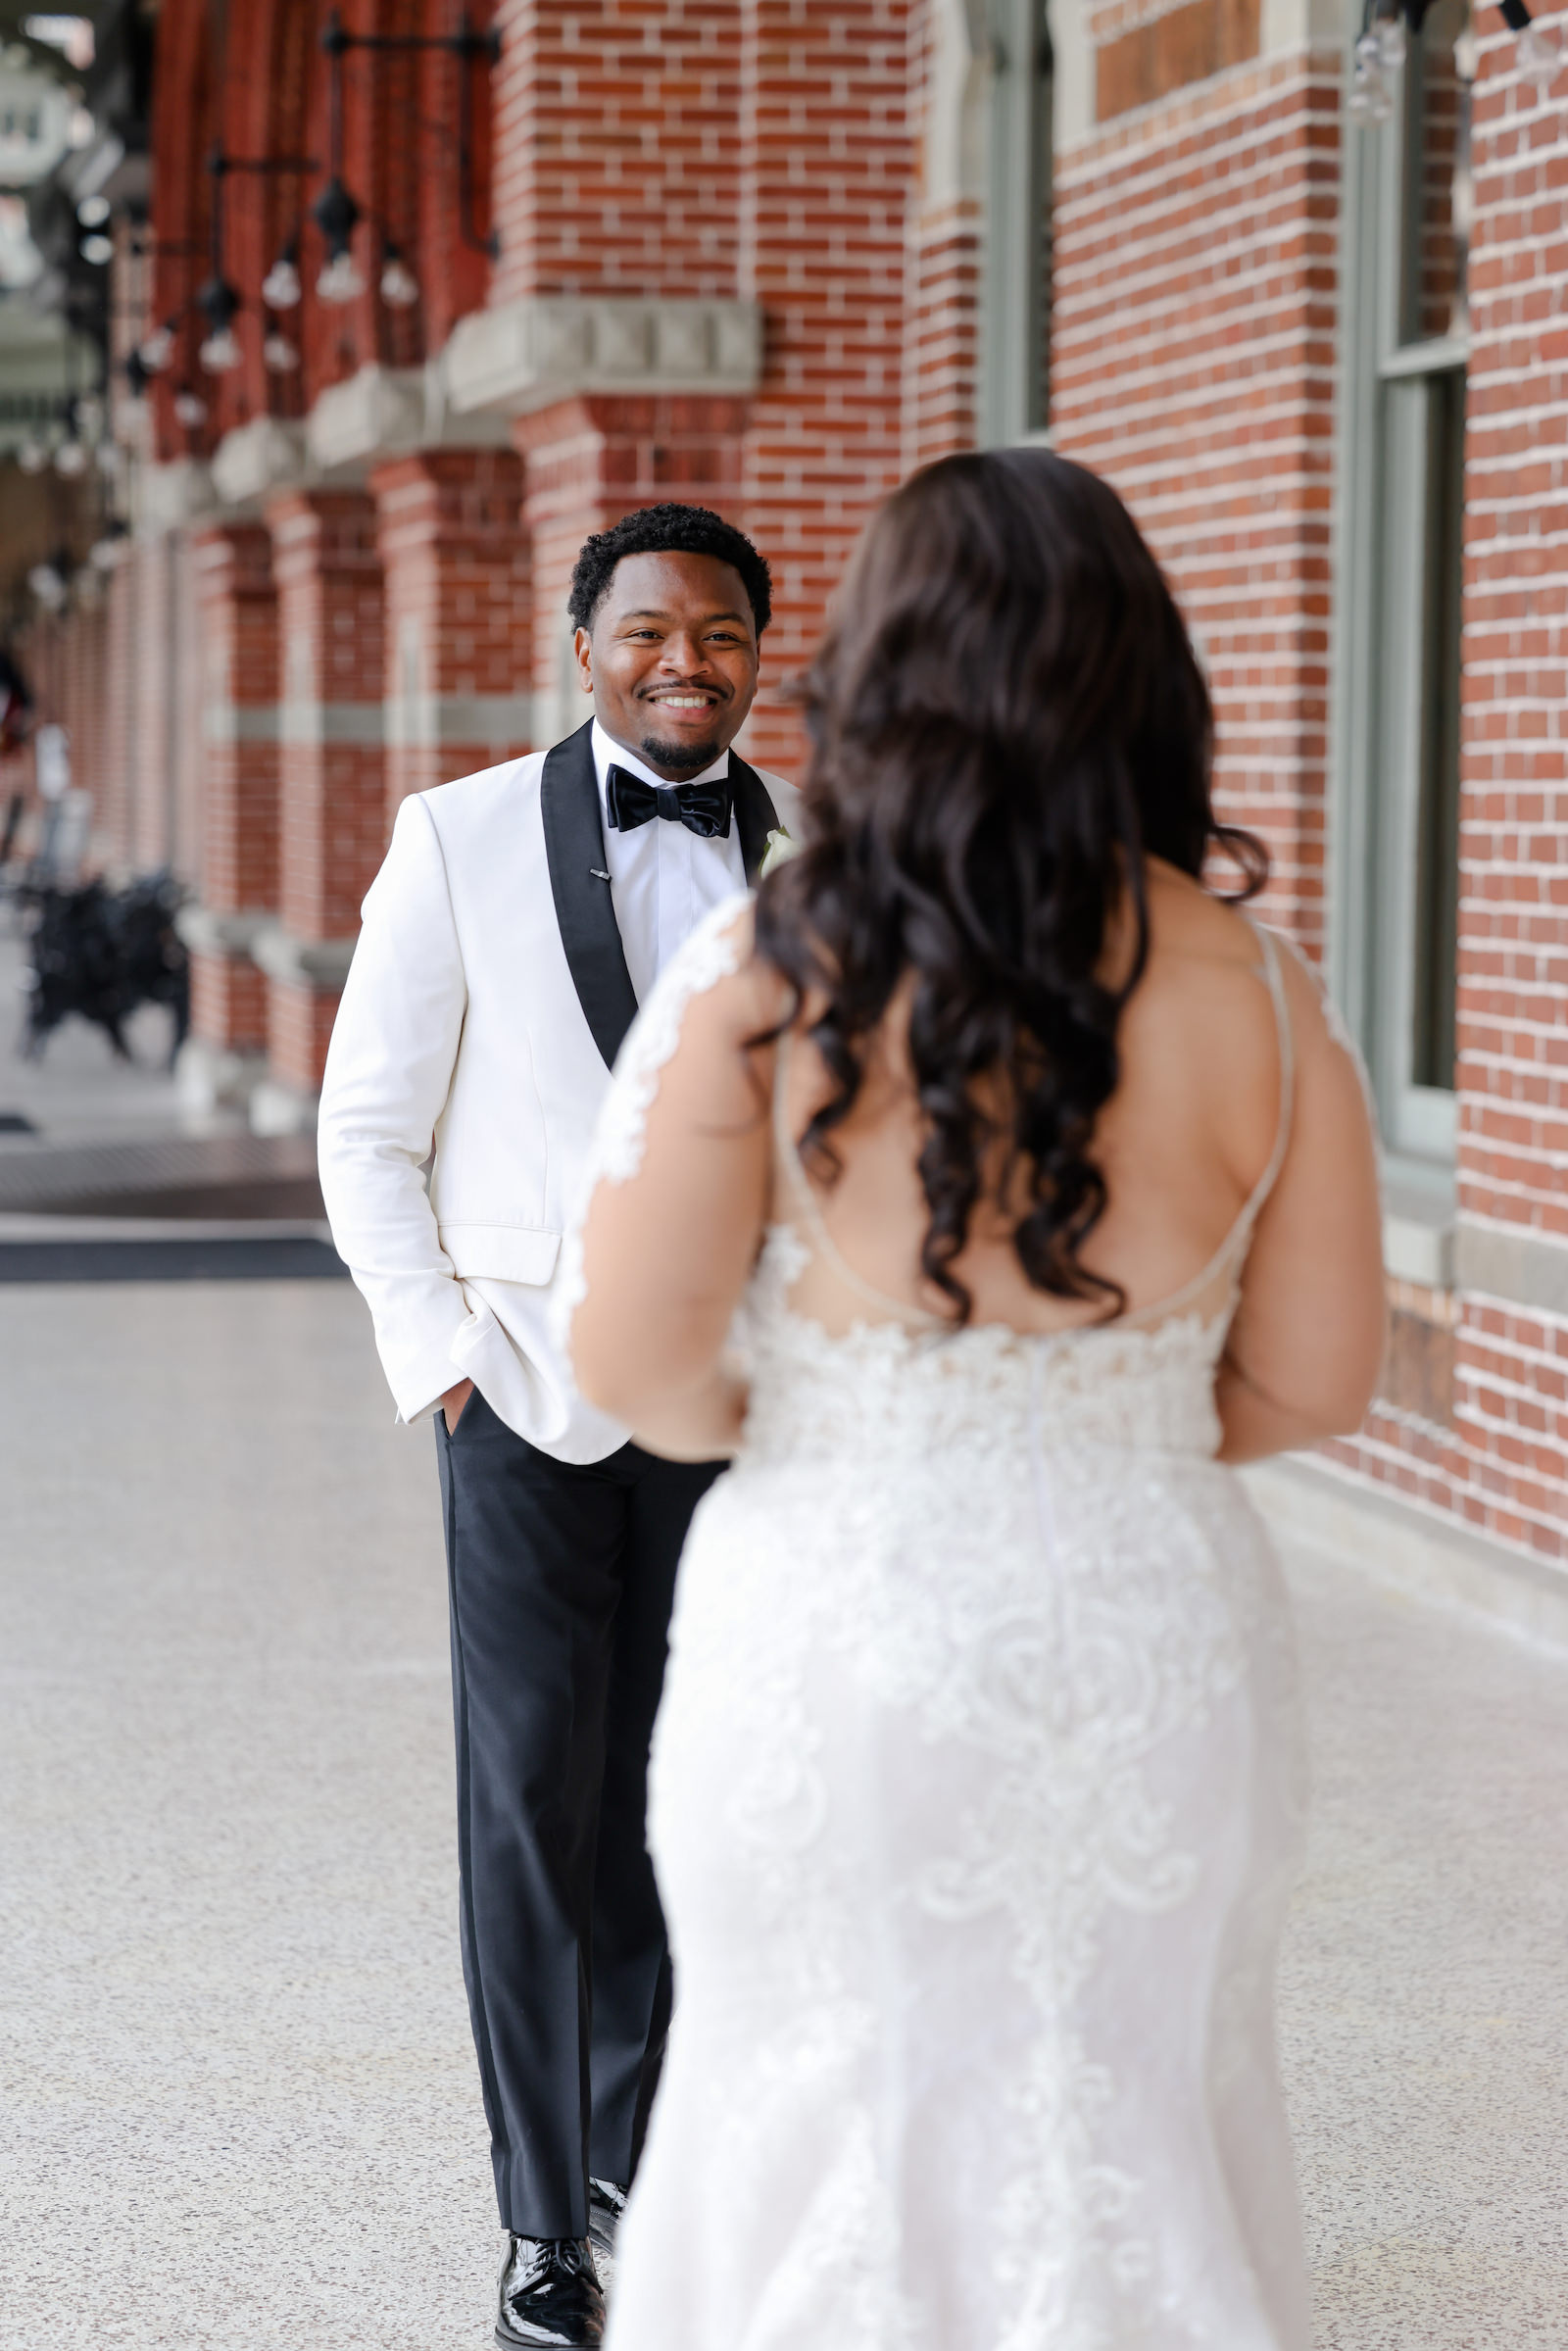 Modern Romantic Bride Wearing Lace and Illusion Long Sleeve Dress with Open Back Wedding Dress, Curled Hair Down First Look Wedding Portrait with Groom in White Tuxedo | Tampa Bay Wedding Photographer Lifelong Photography Studio | Wedding Hair and Makeup Femme Akoi Beauty Studio